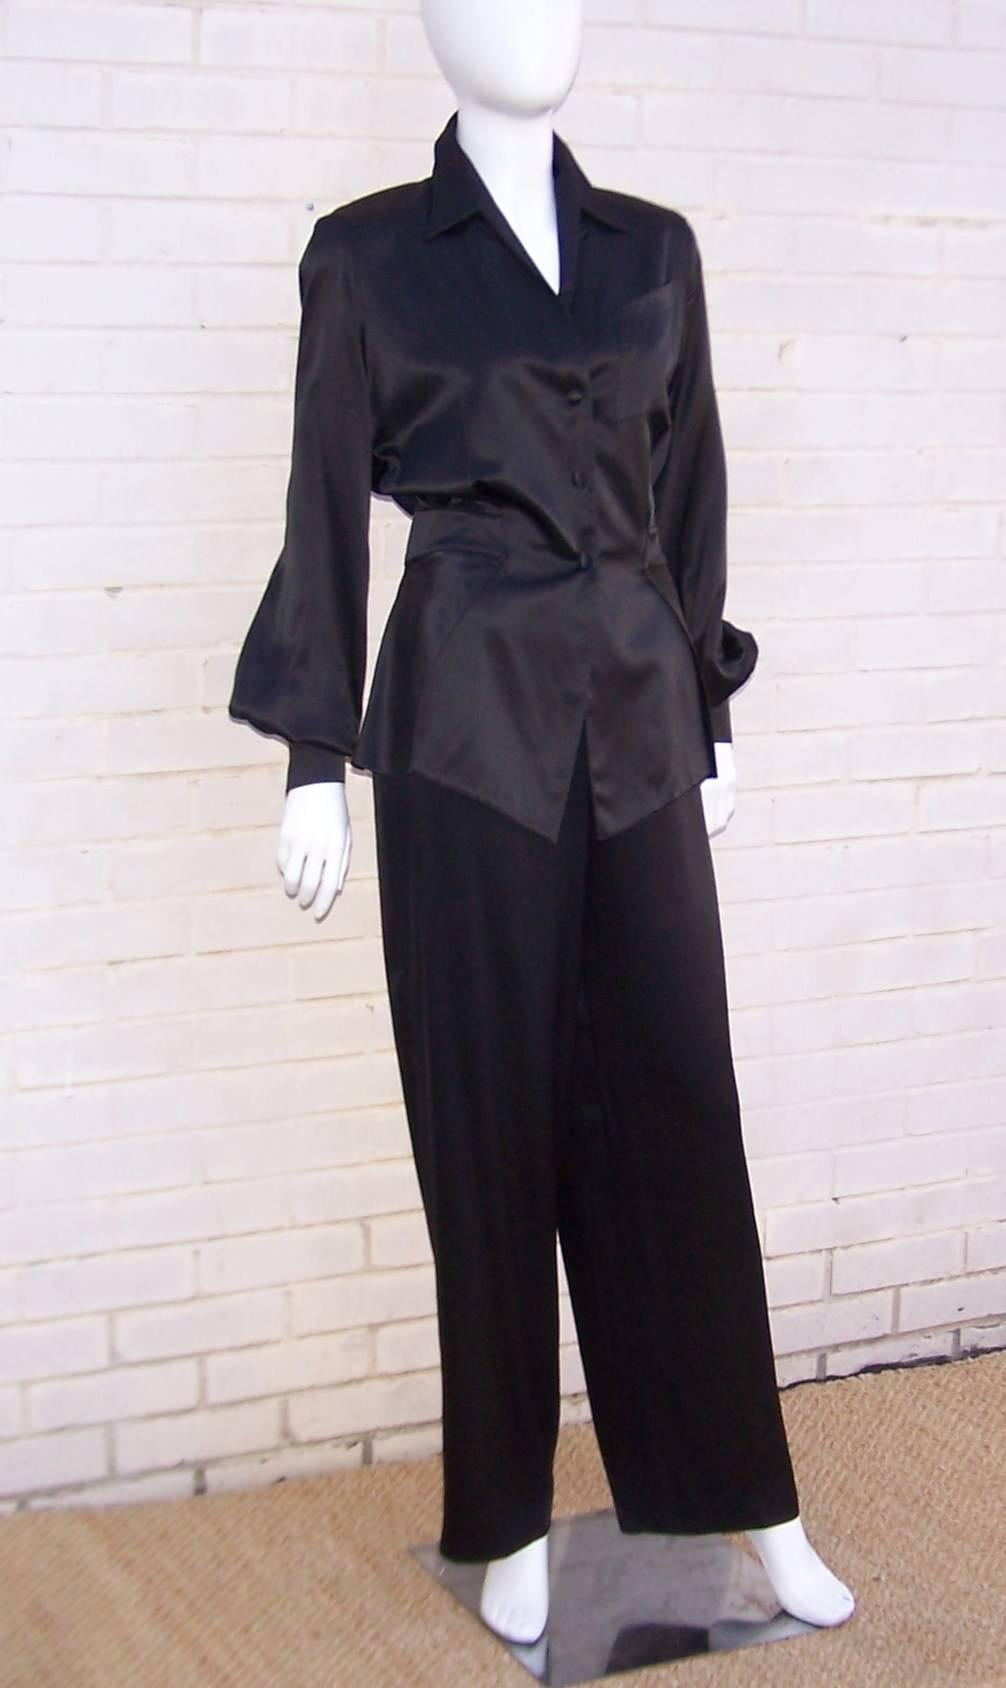 Thierry Mugler expertly mixes a 1940's smoking jacket style with modern sensibilities to create a versatile evening pajama ensemble perfect for hostess wear or an evening on the town.  The top has button covered snaps at the front with soft shoulder